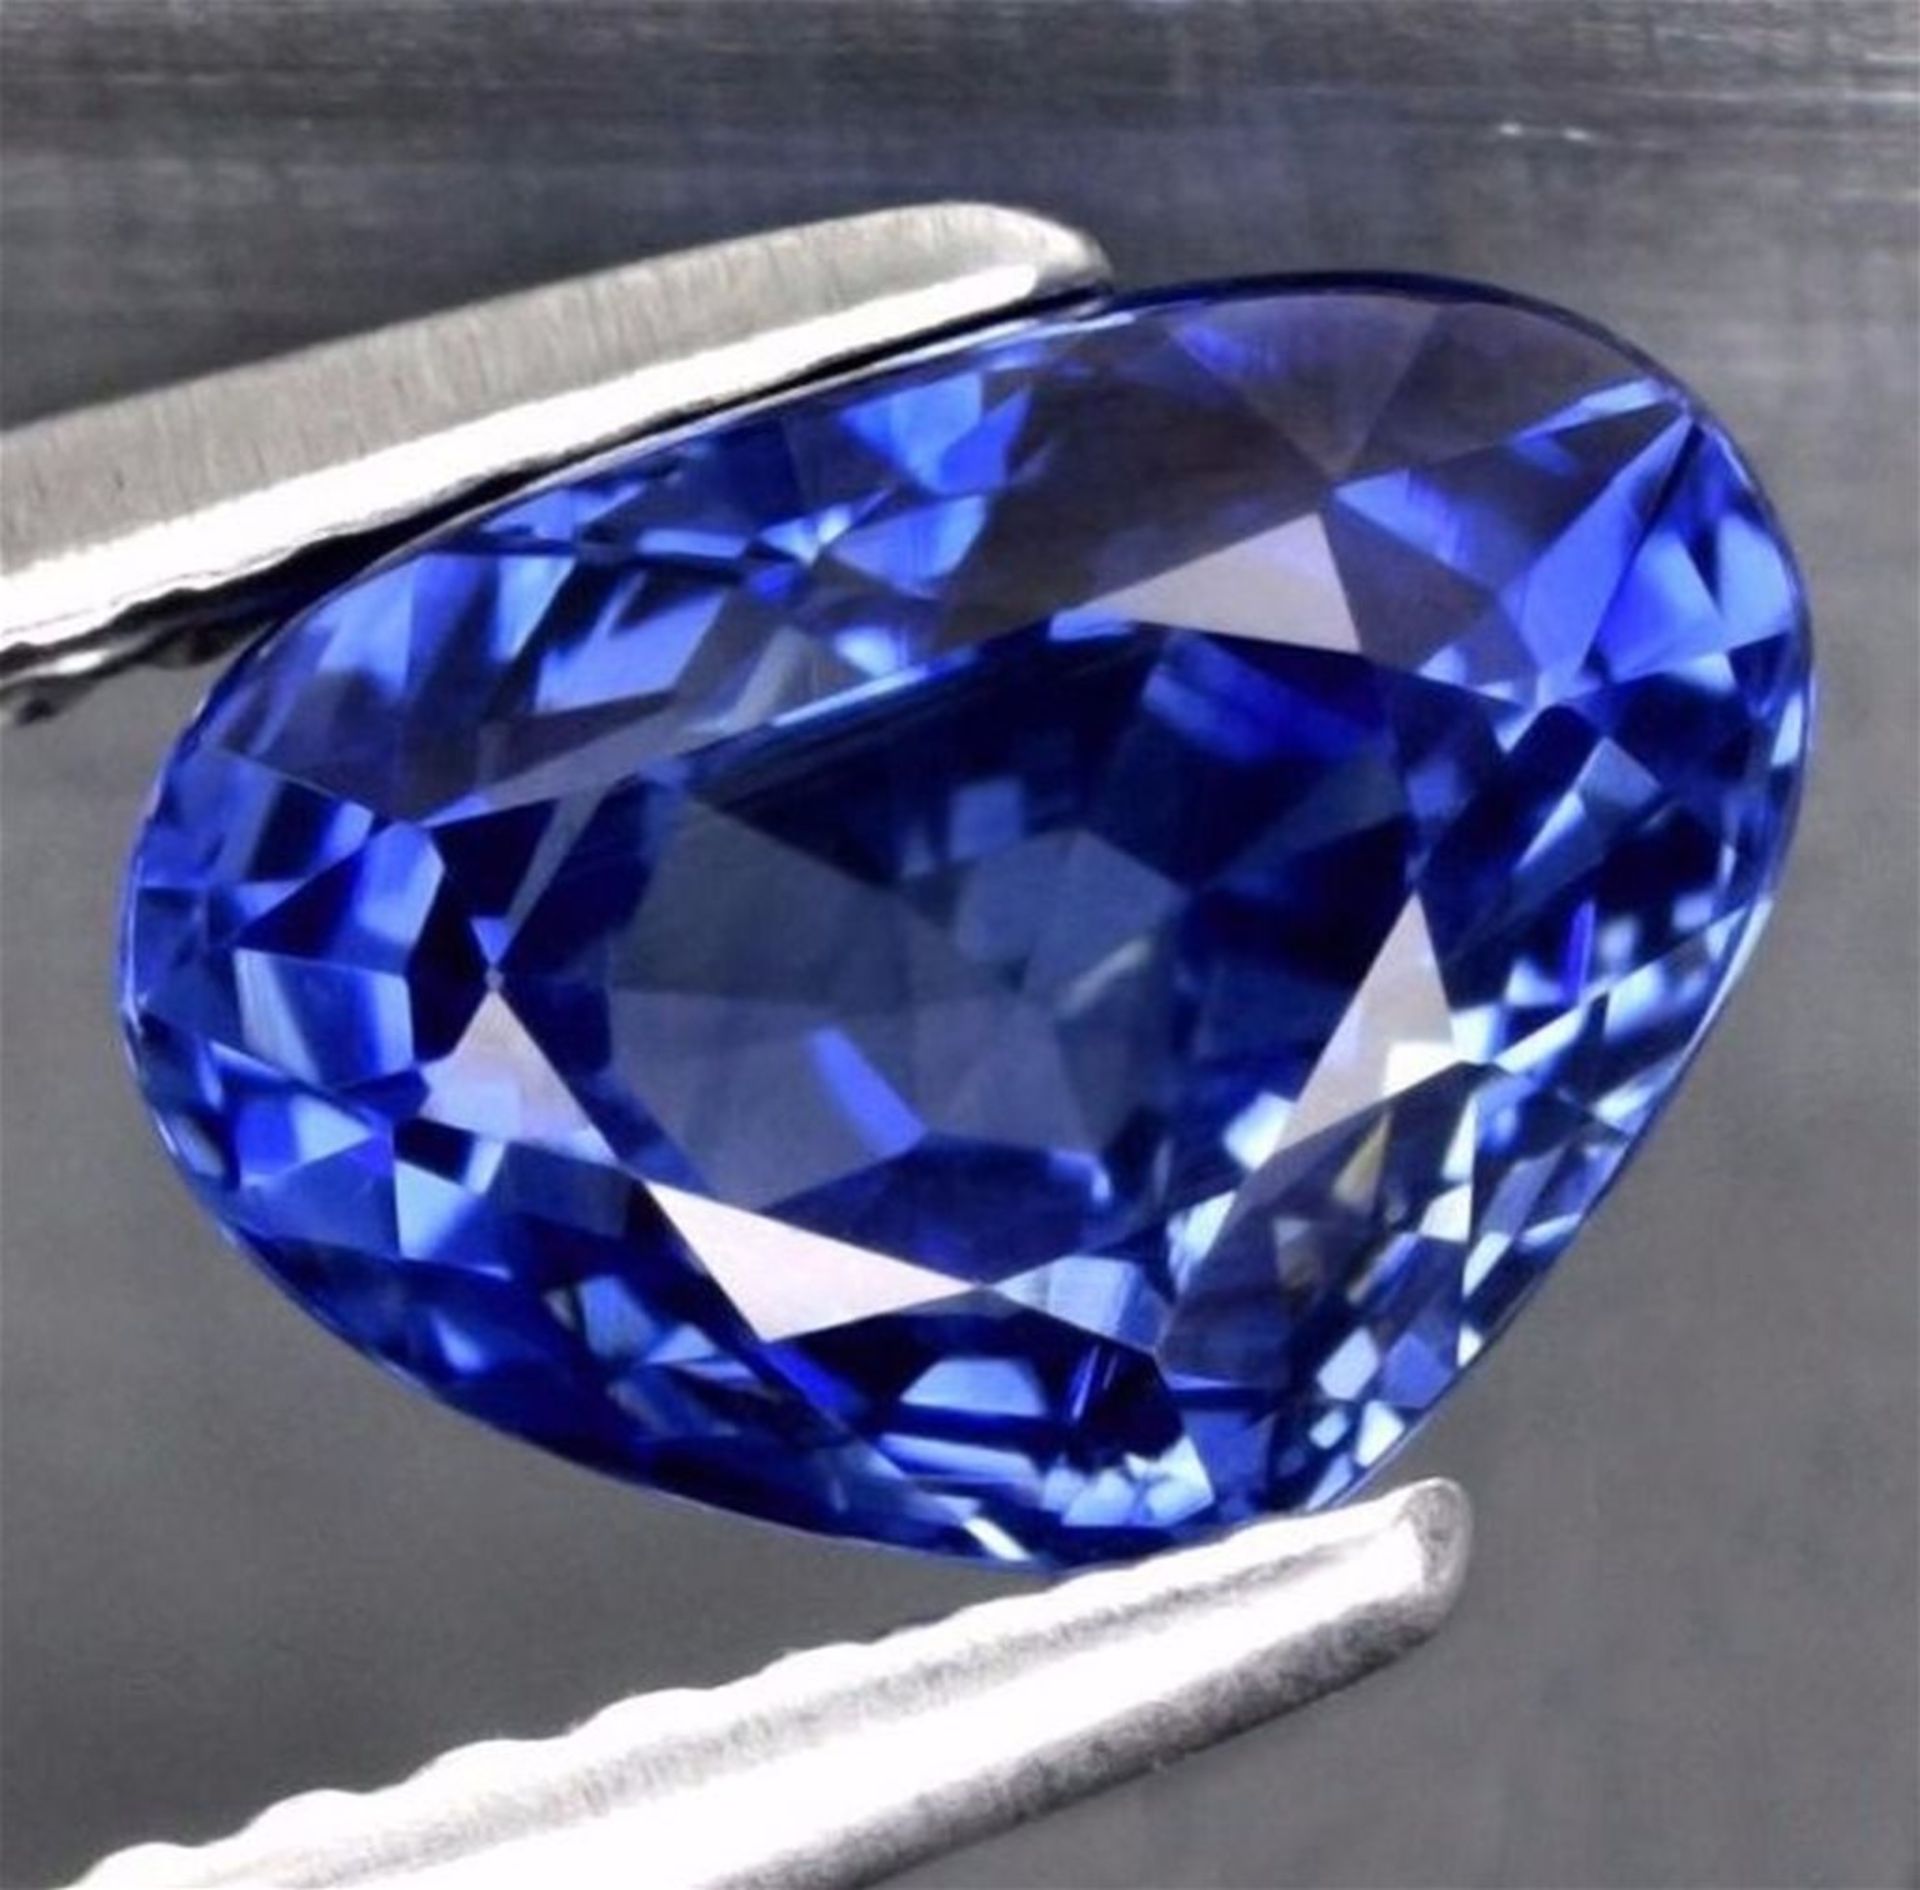 GIA Certified 2.08 ct. Blue Sapphire